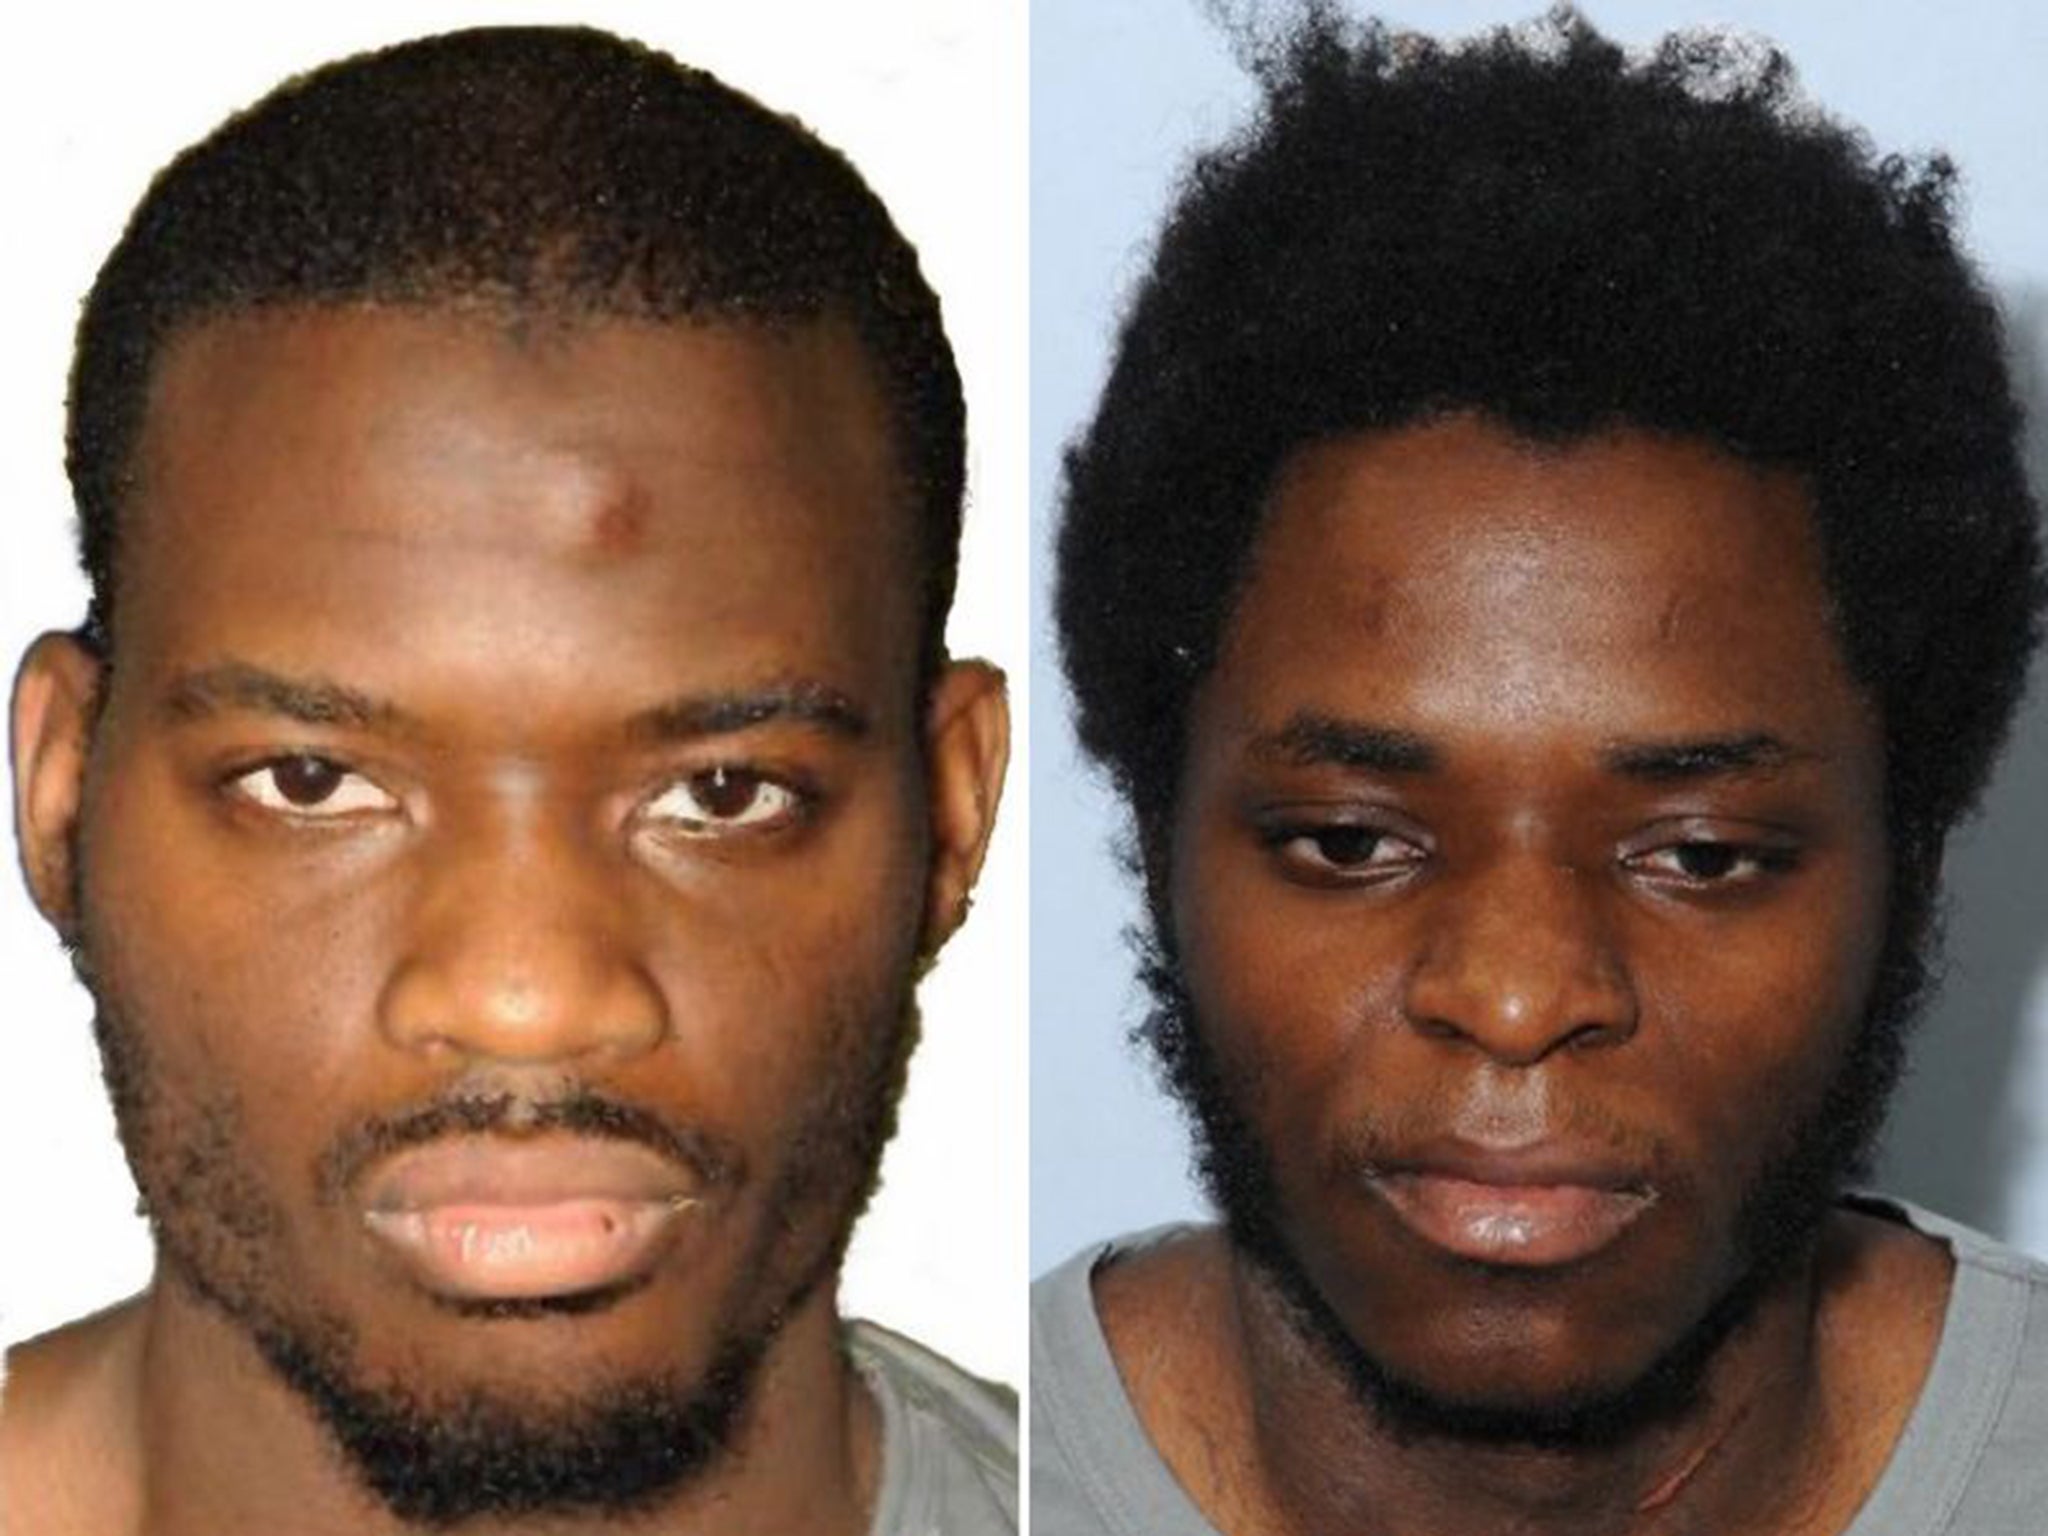 Lee Rigby's killers: Michael Adebolajo, left, and Michael Adebowale, had both attended al-Muhajiroun events